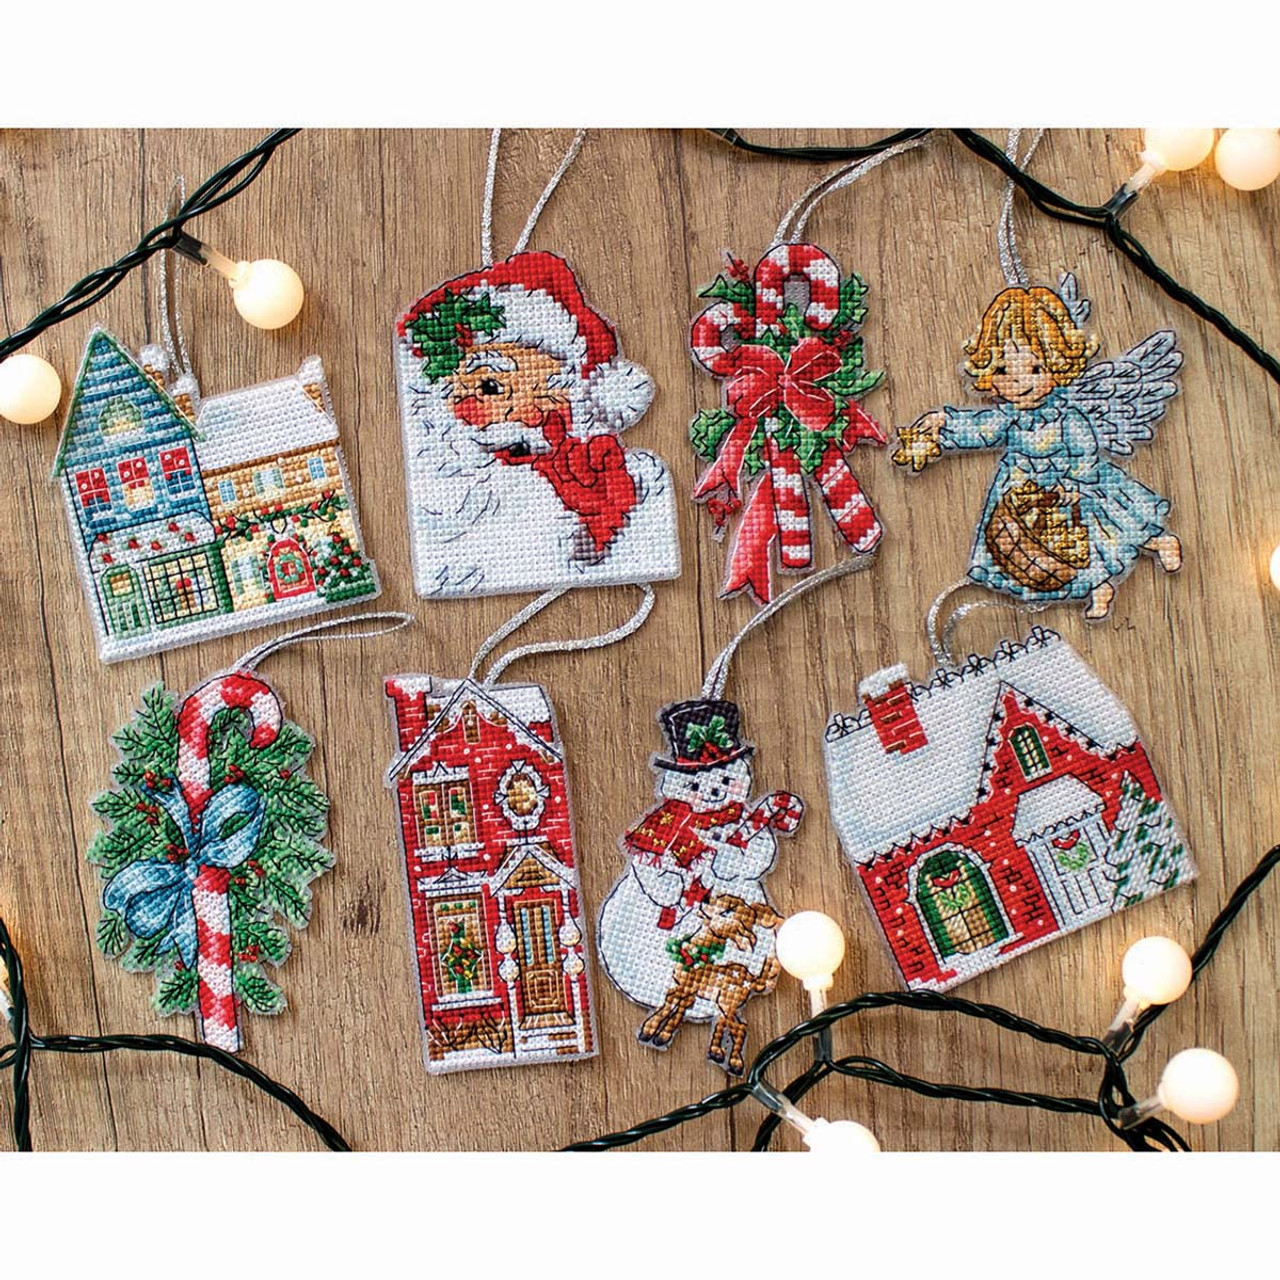 cross stitch Christmas ornament kits Archives - Cross Stitch in Time